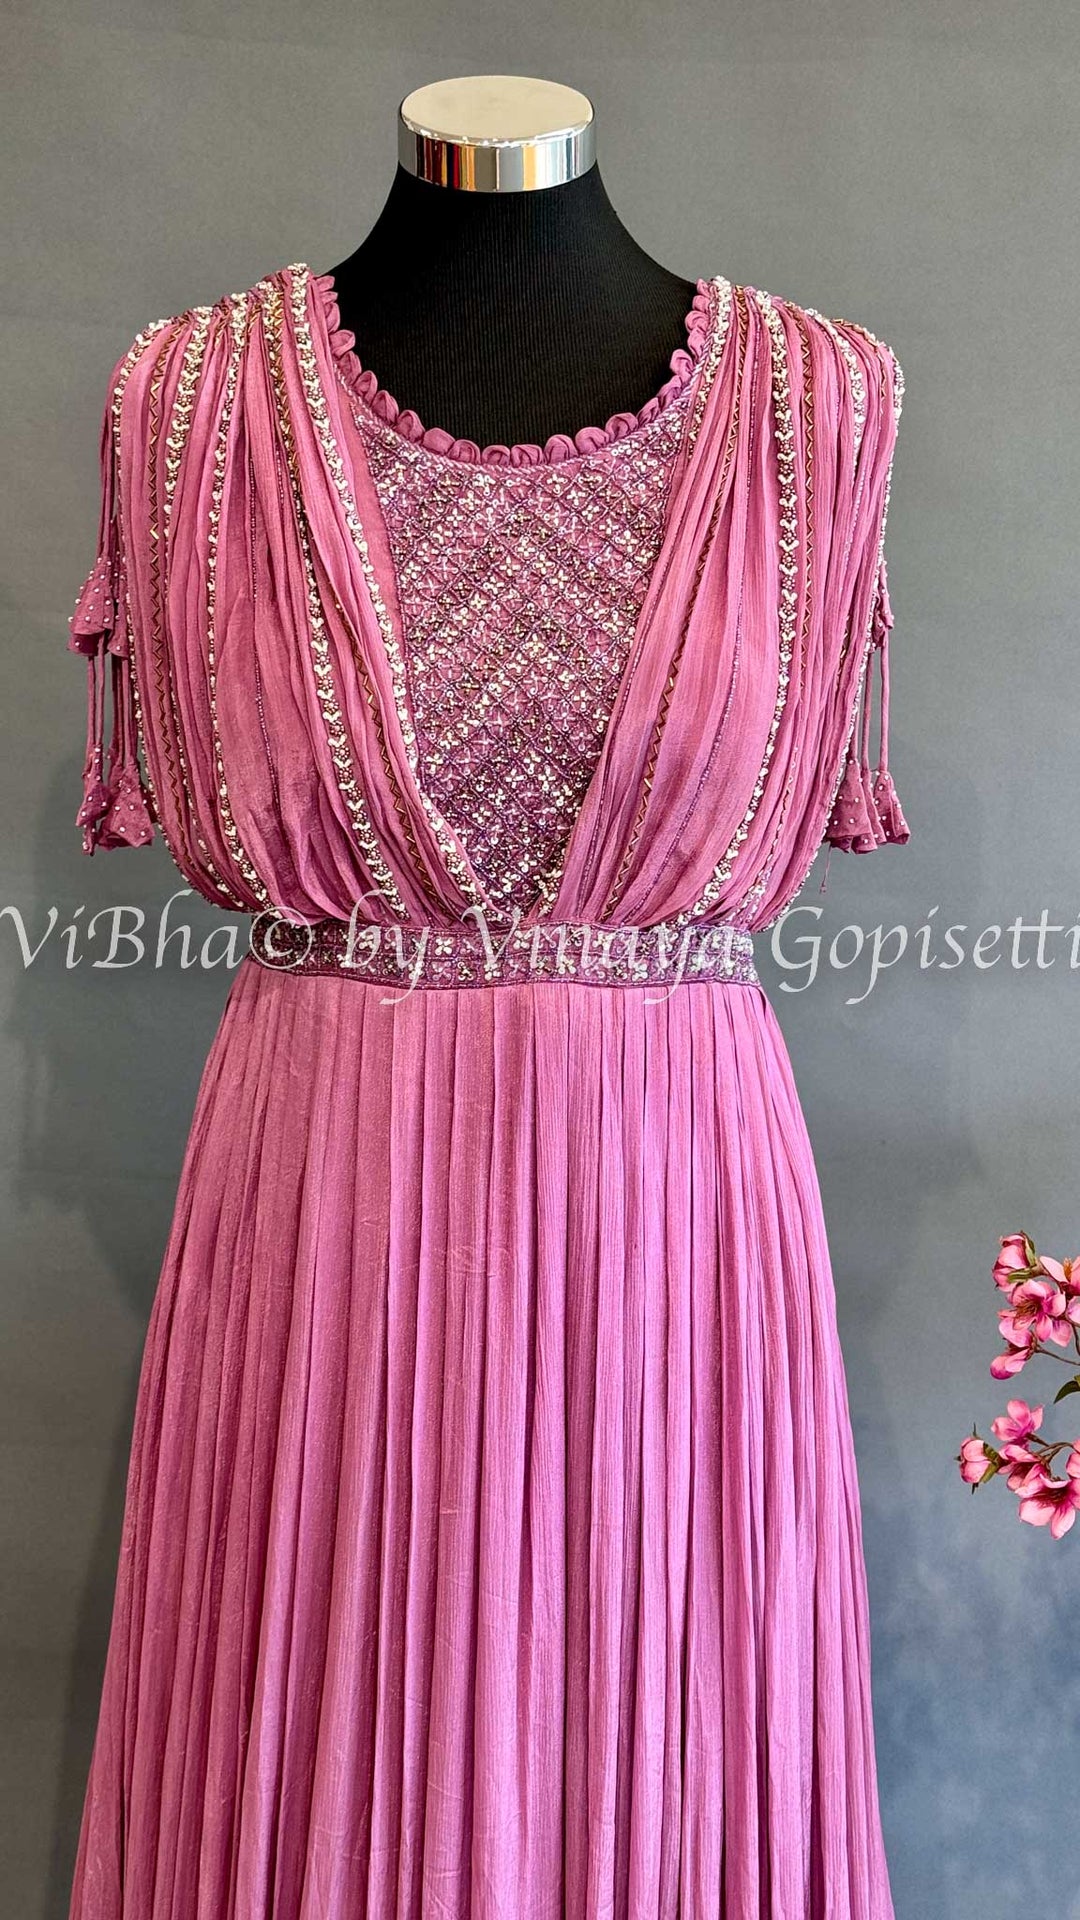 Dark Pink Crushed Floor Length Gown With Embroidered Yoke